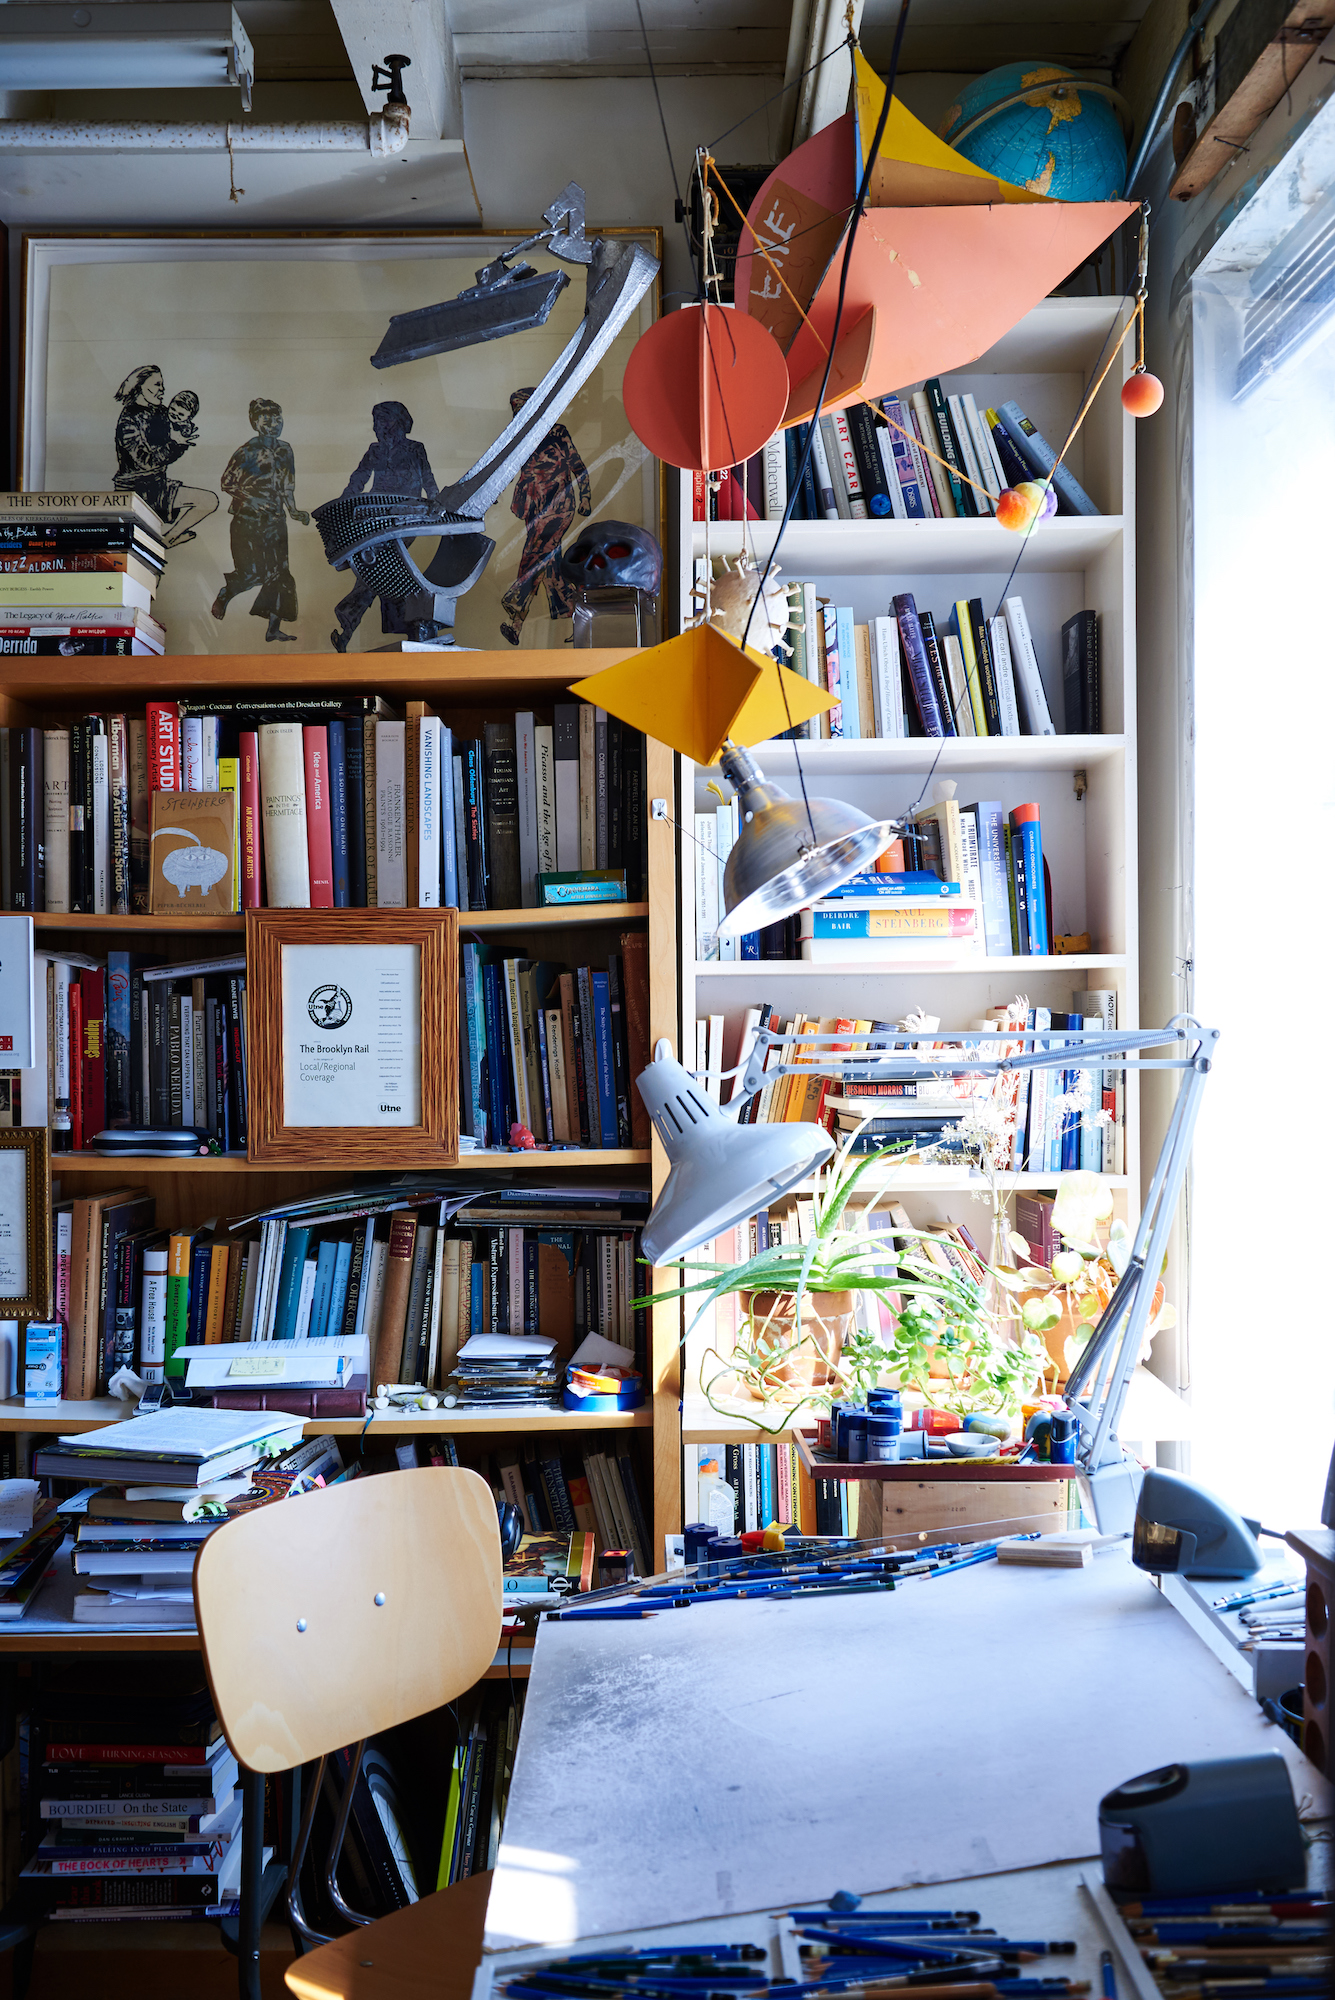 A drawing table with books in the background and a mobile hanging from the ceiling.